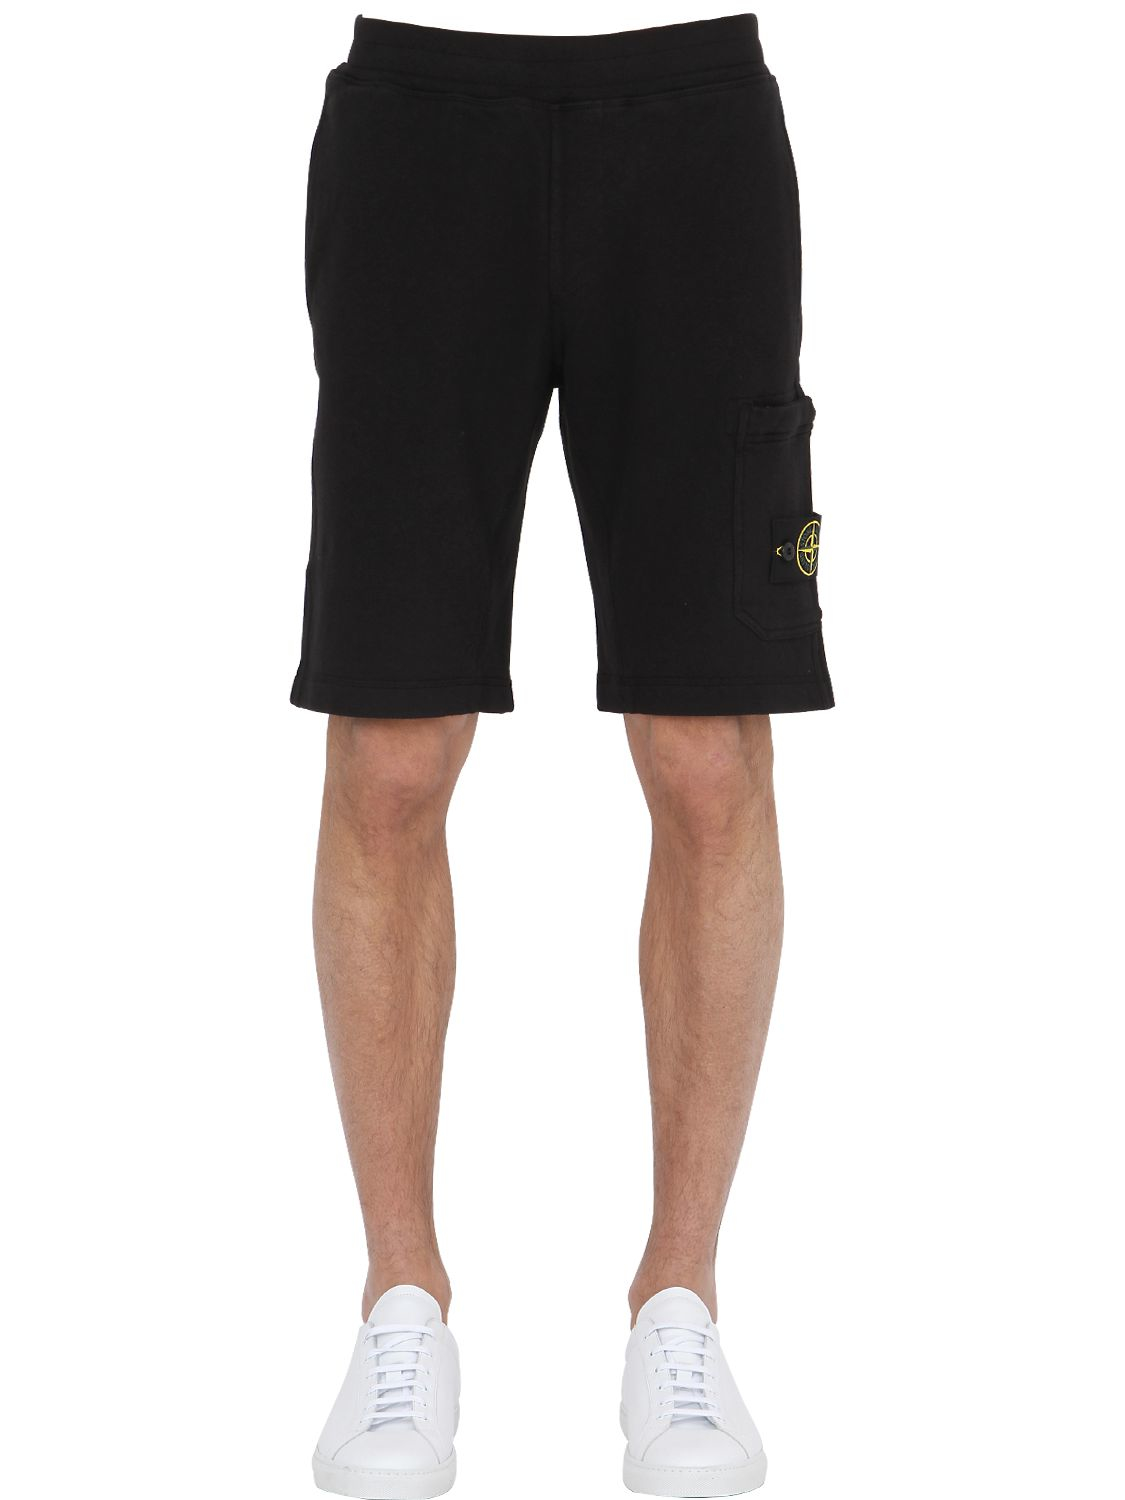 Stone Island Malfile Cotton Jogging Shorts in Black for Men - Lyst